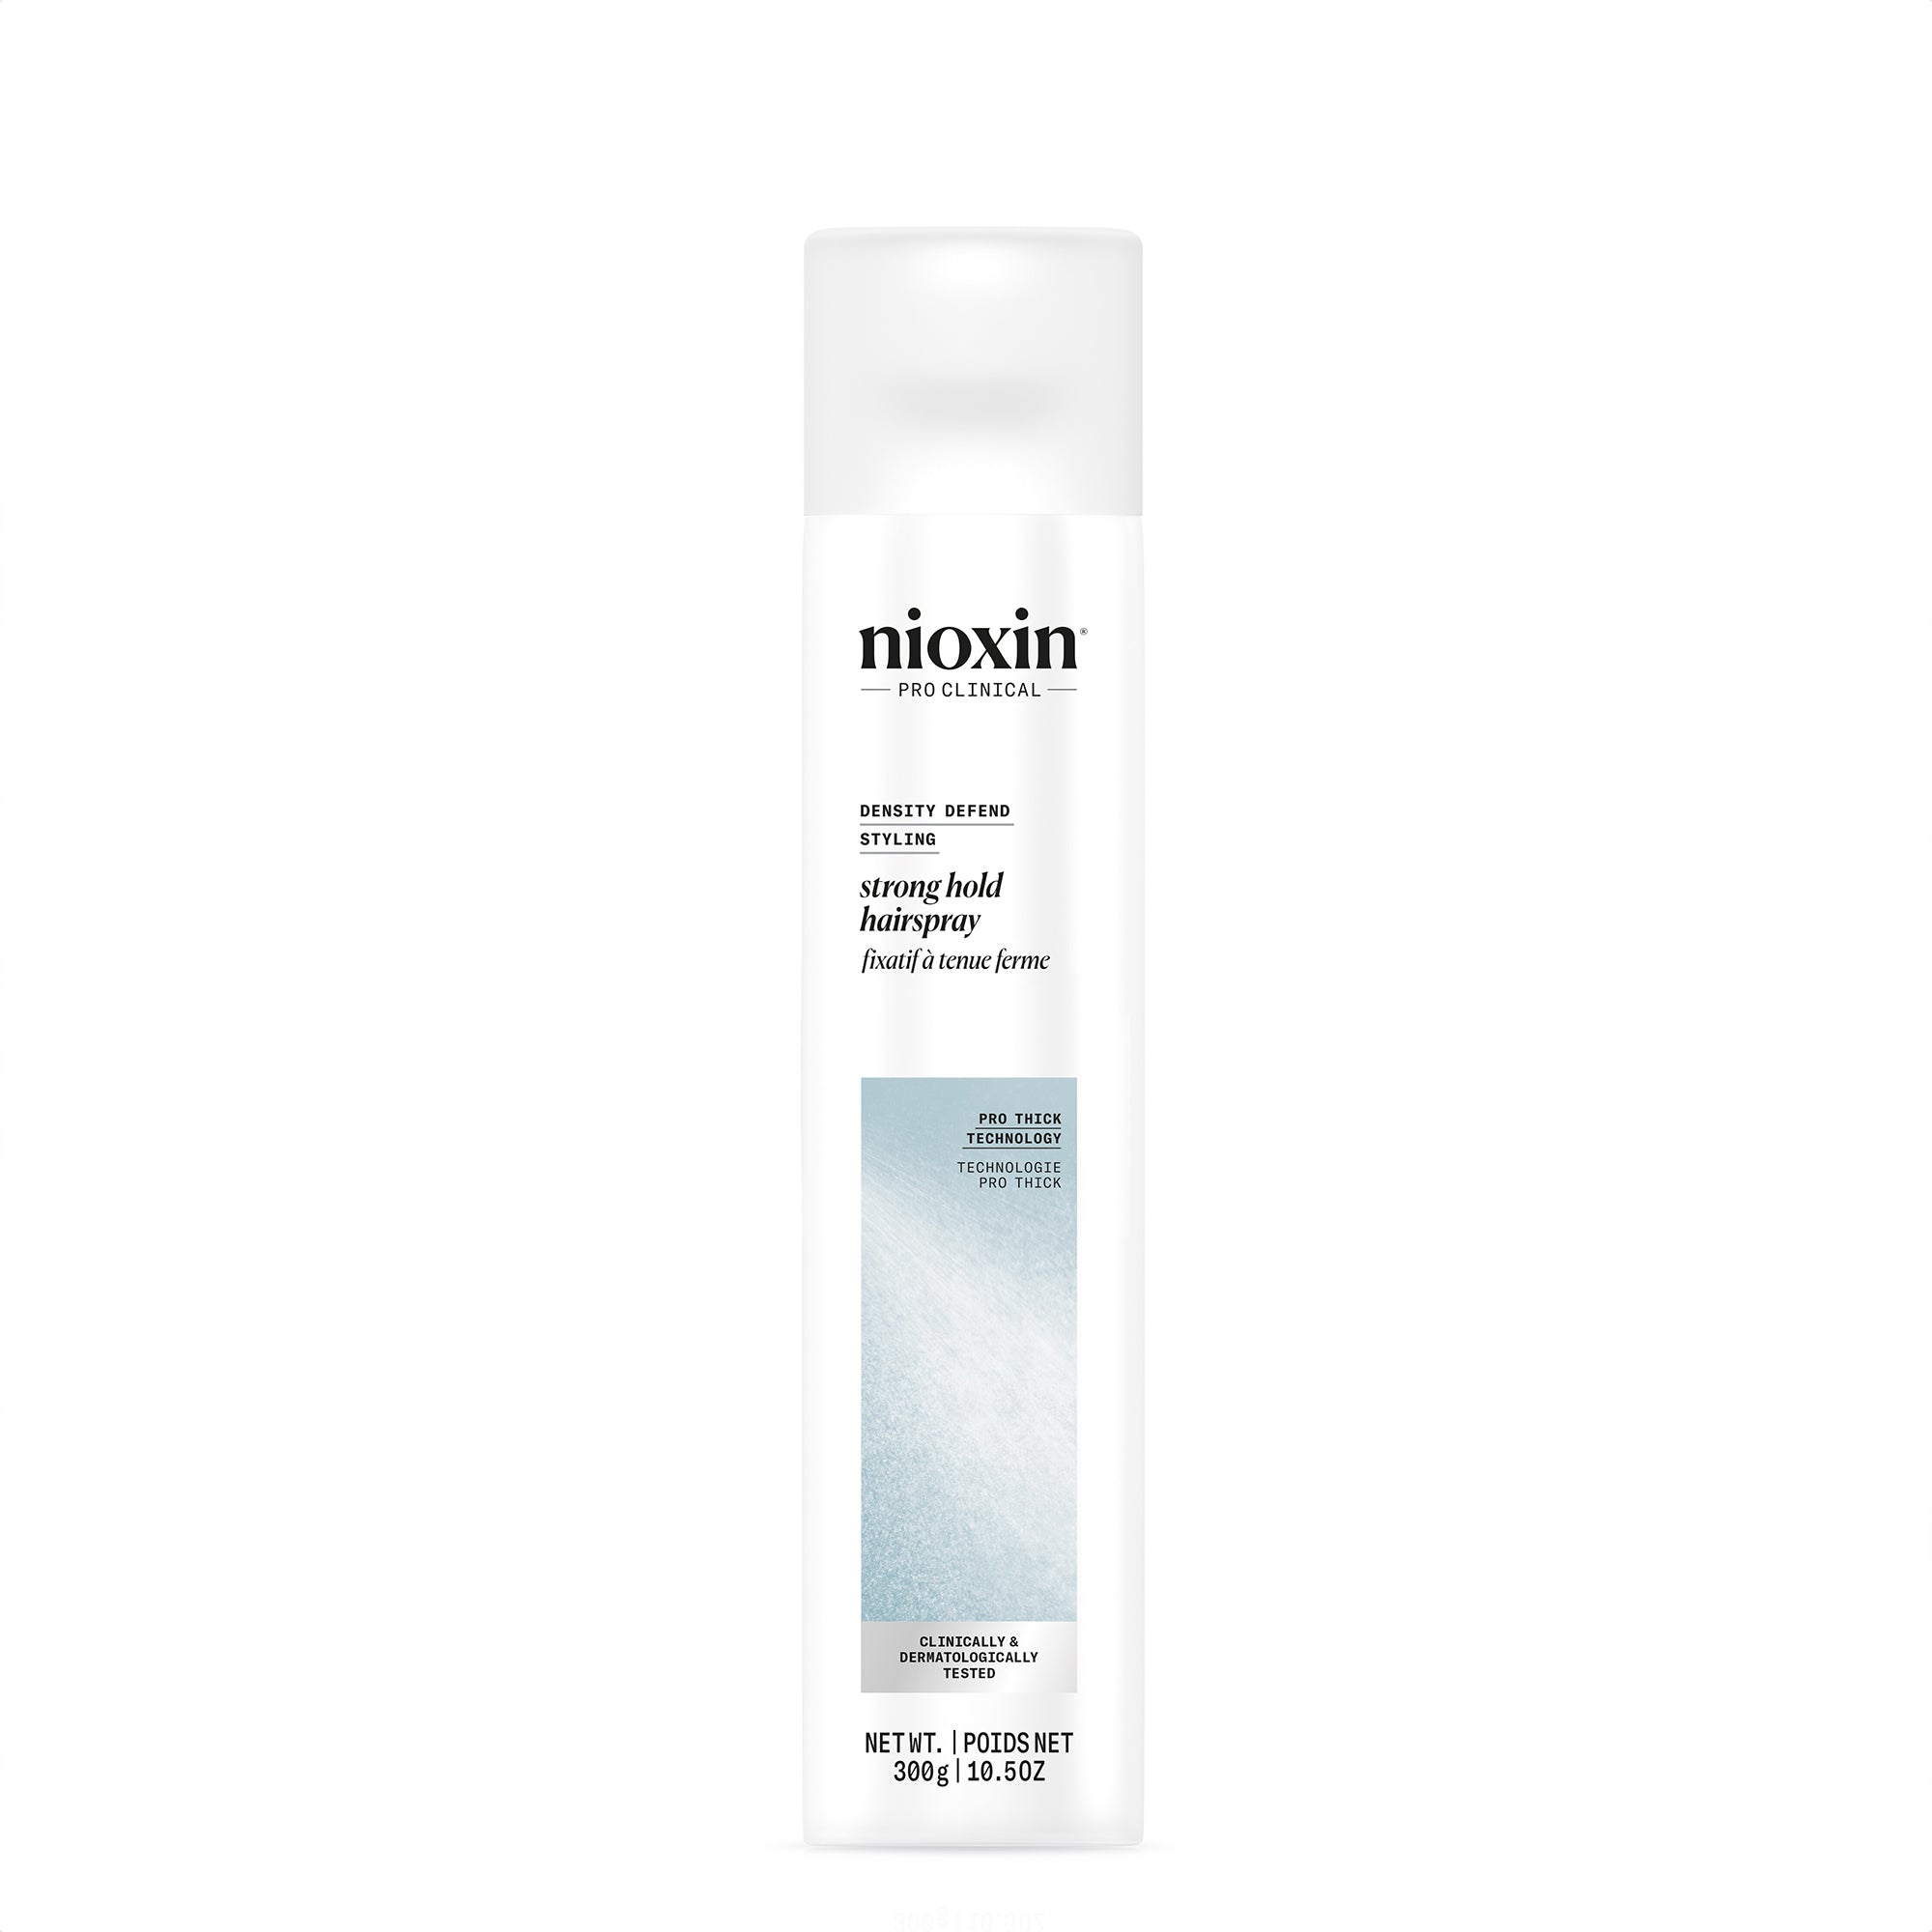 Nioxin Density Defend Styling Strong Hold Hairspray / 10.5oz